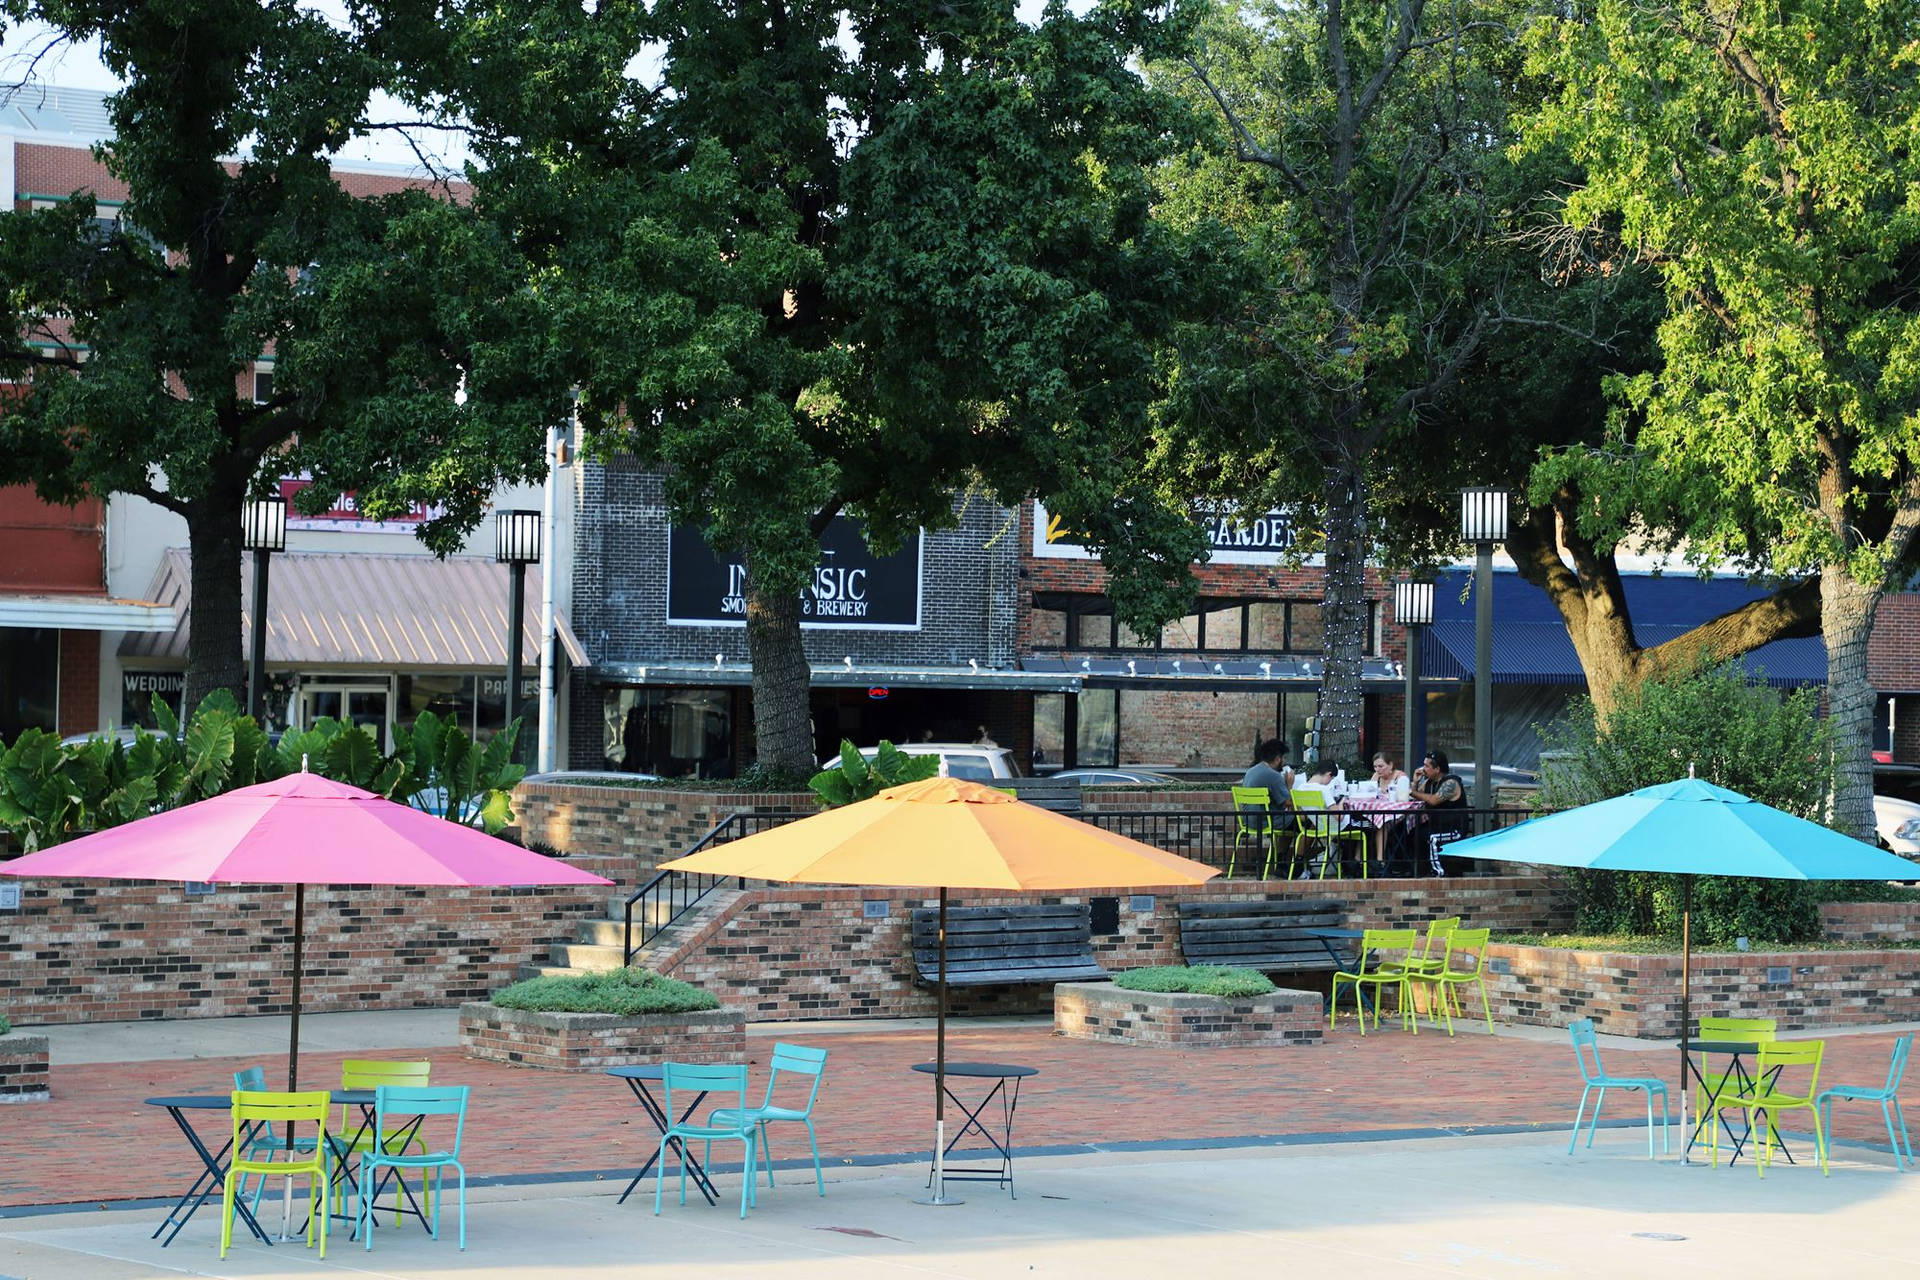 Seating Areas At Downtown Garland Square Wallpaper